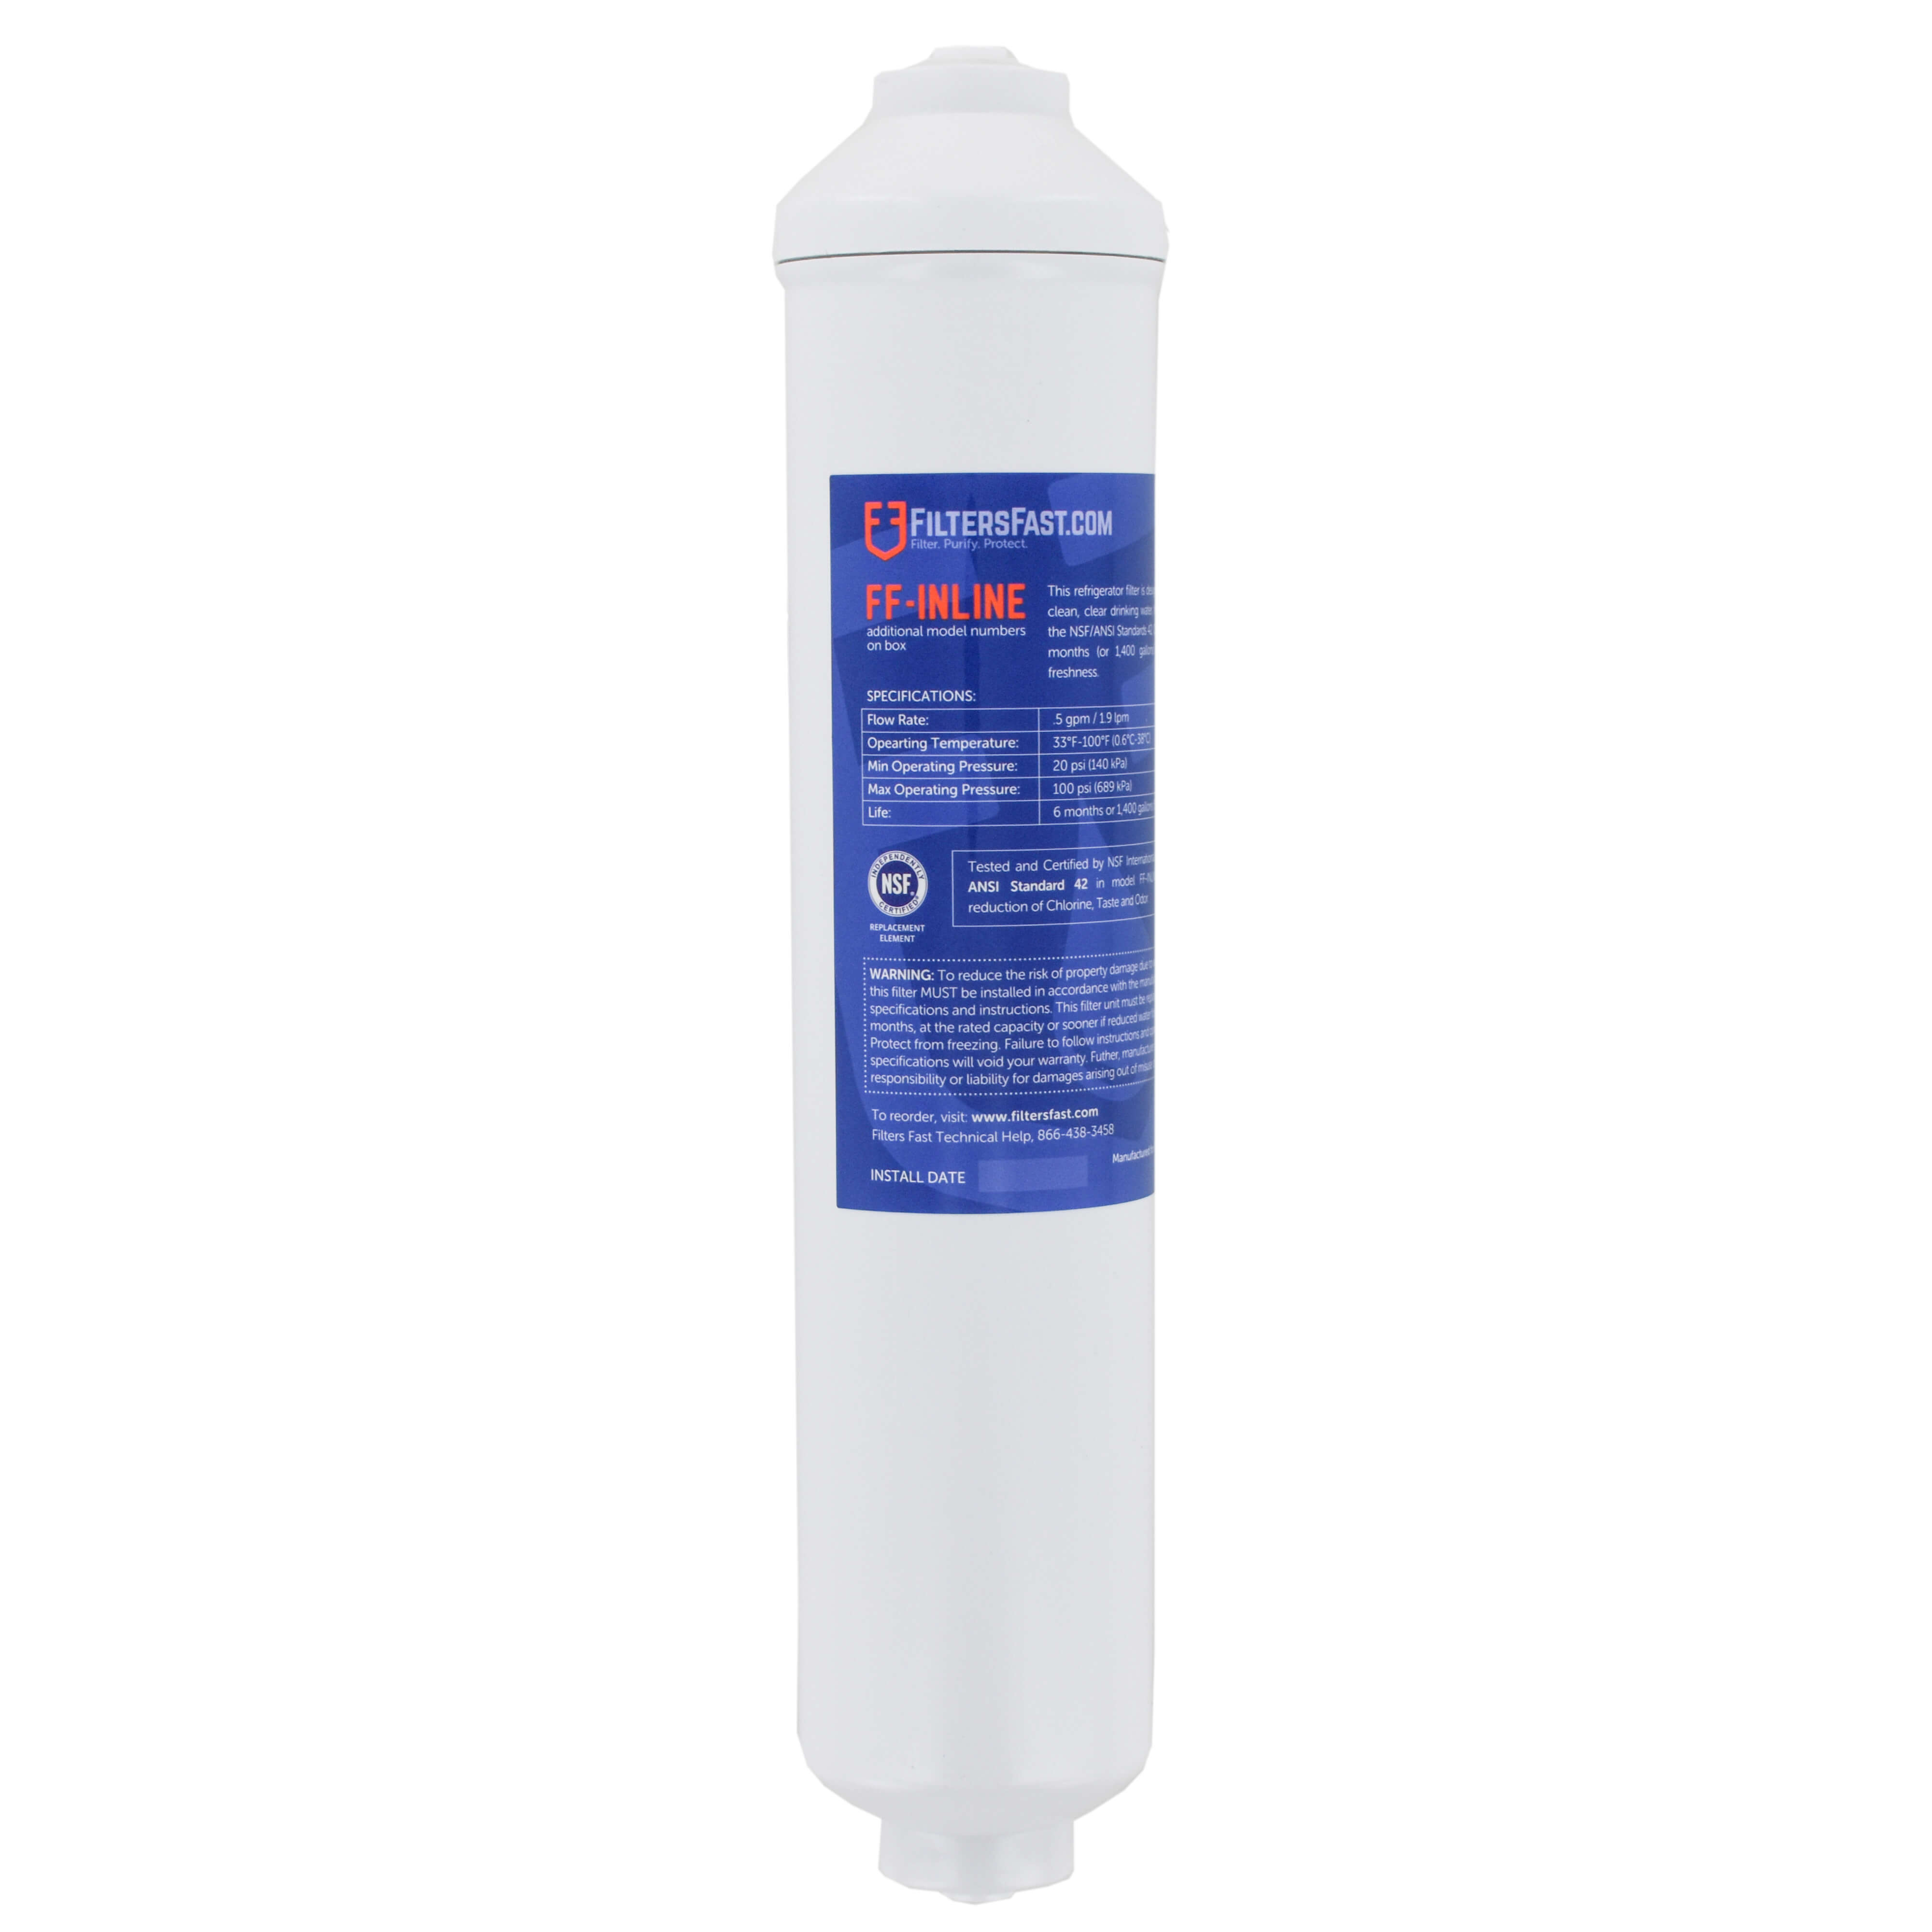 Filters Fast&reg; FF-INLINE Replacement For GE GXRTDR